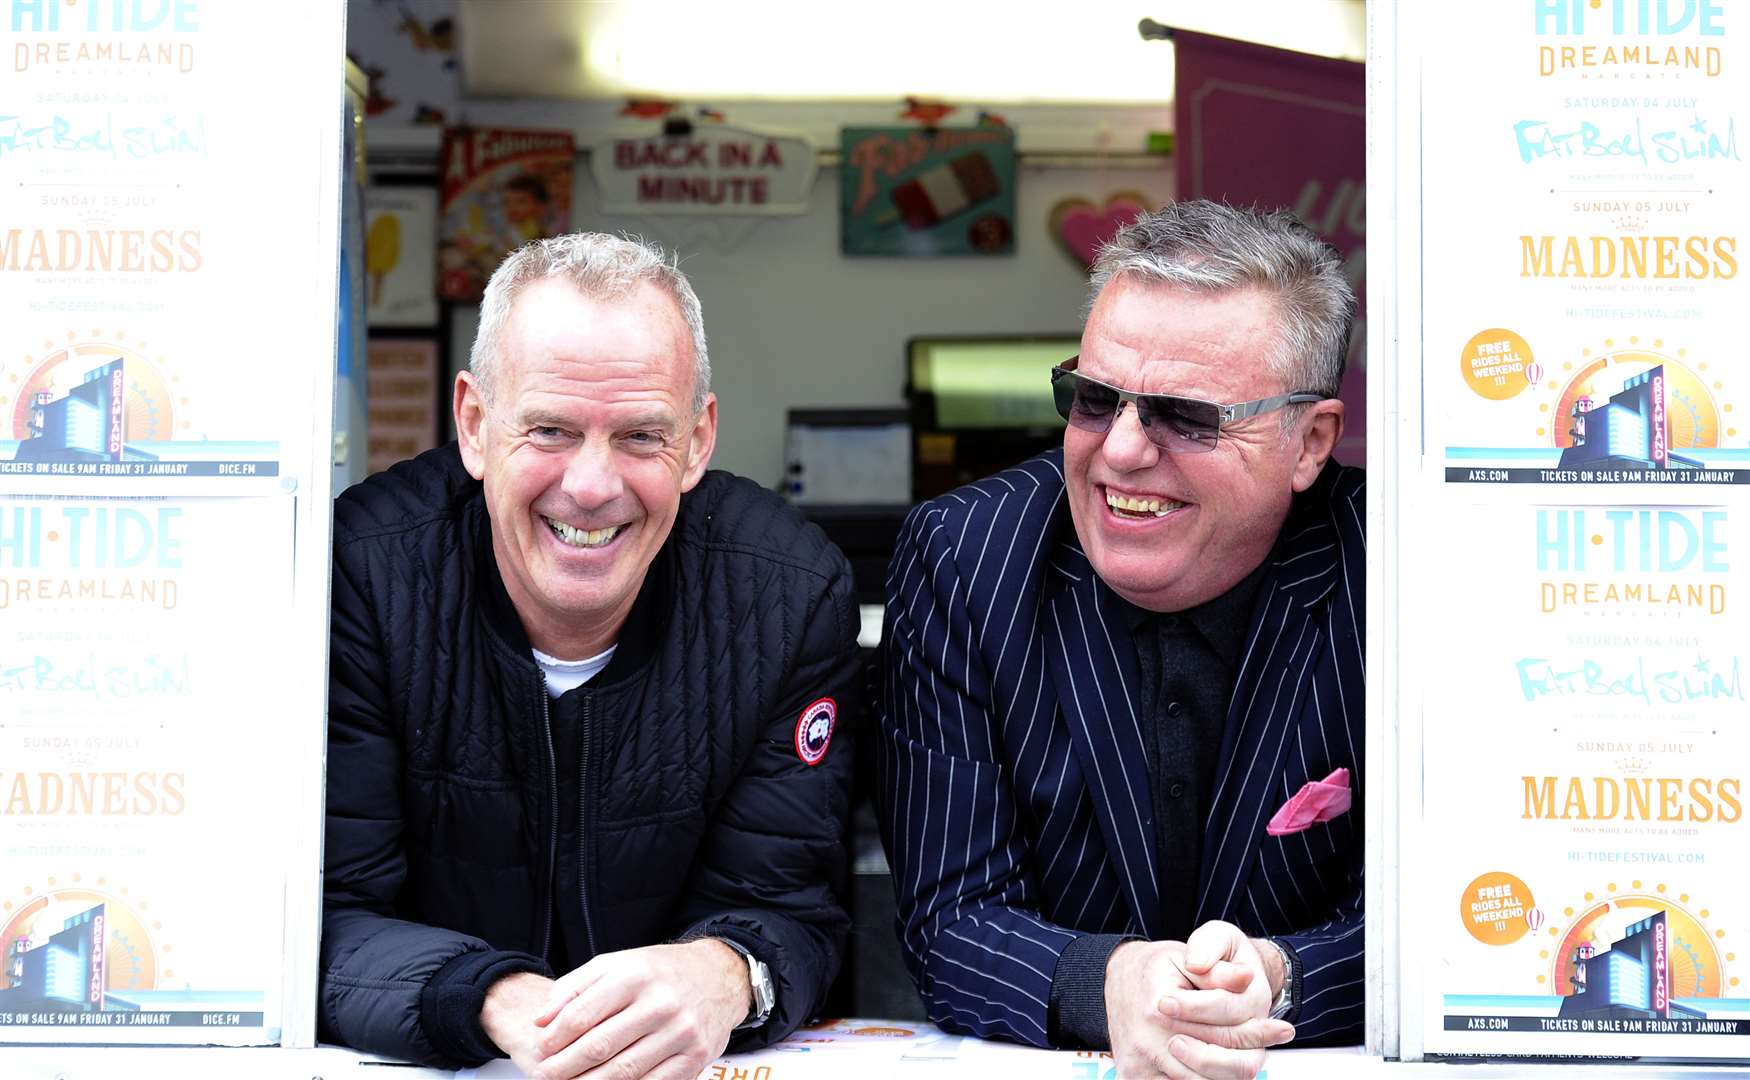 HiTide launch at Dreamland with Norman Cook (aka Fatboy Slim) and Madness front man Suggs Picture: Matt Kent